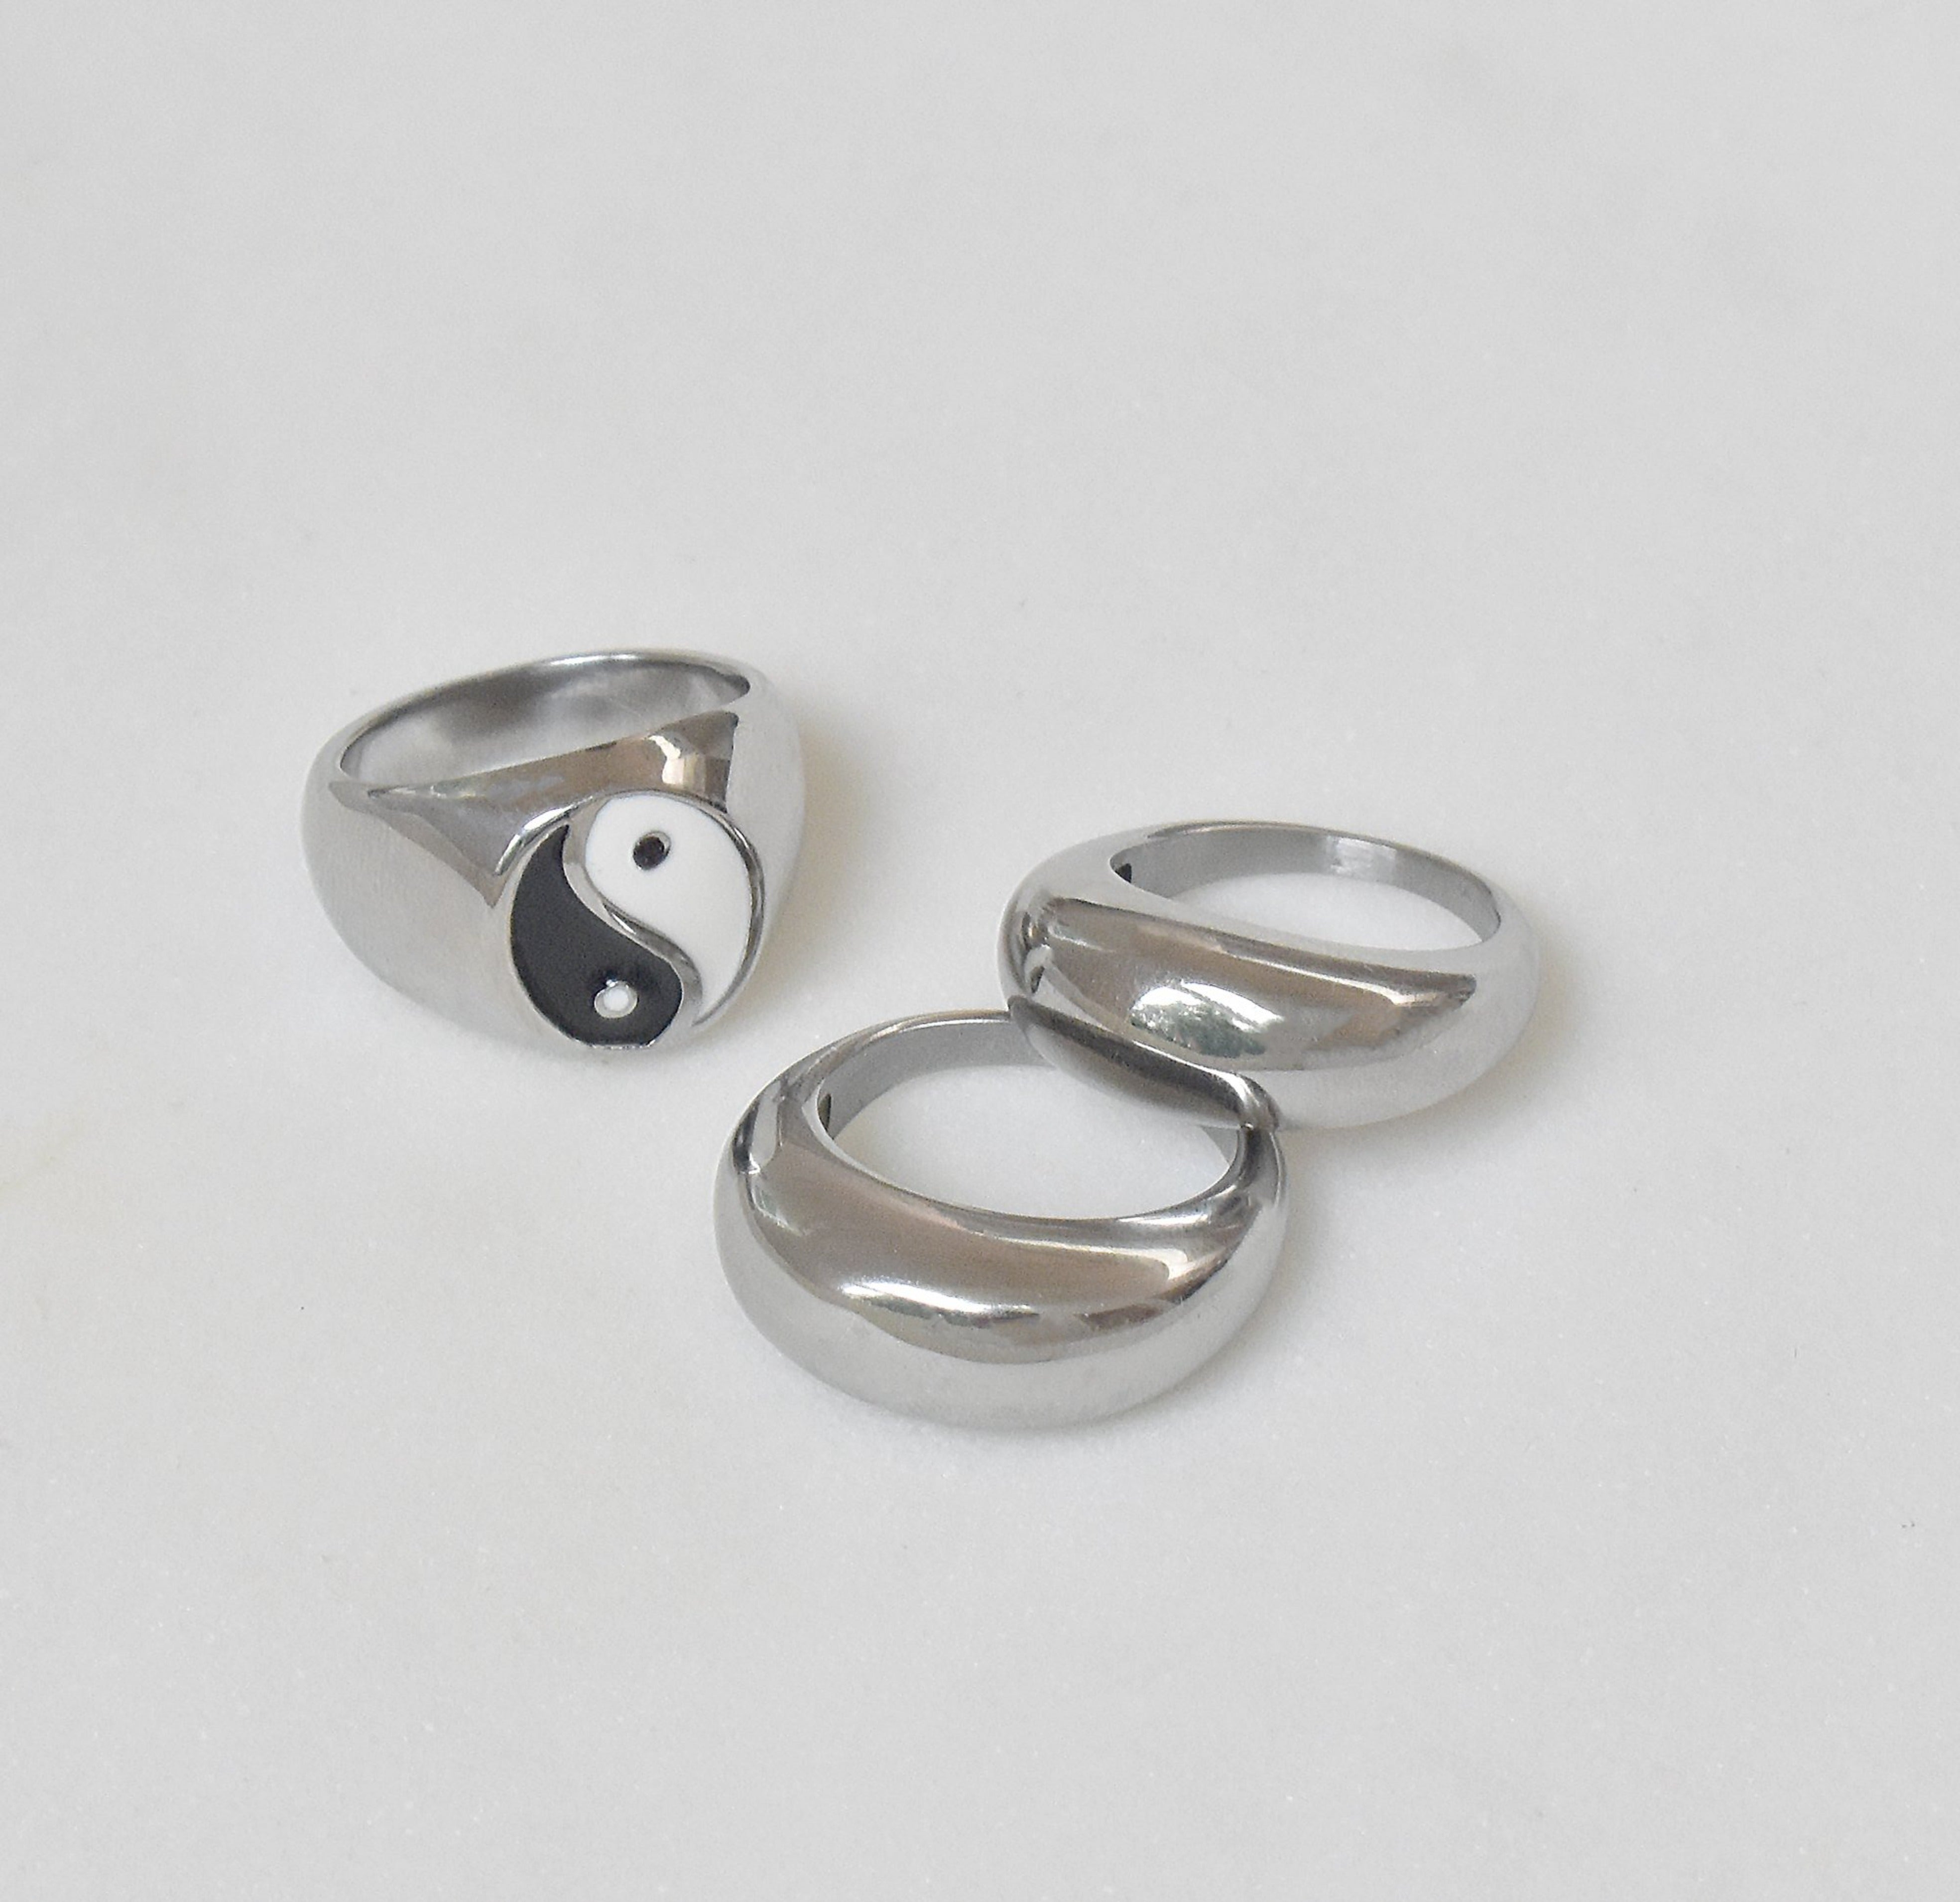 silver dome ring and silver yin yang signet ring. Silver waterproof jewelry